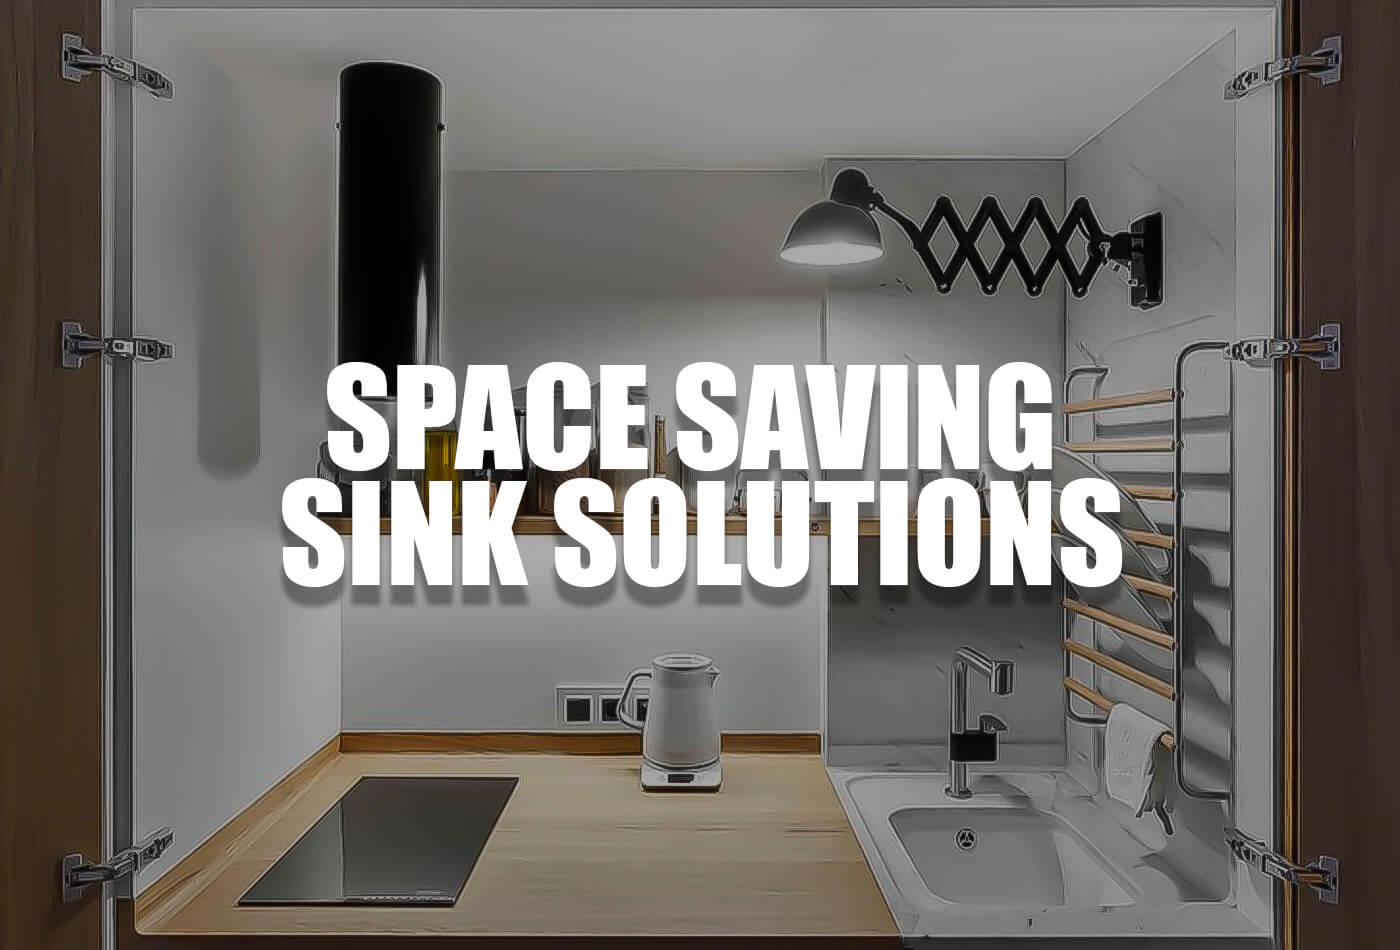 Looking for Space-saving Sink Solutions?